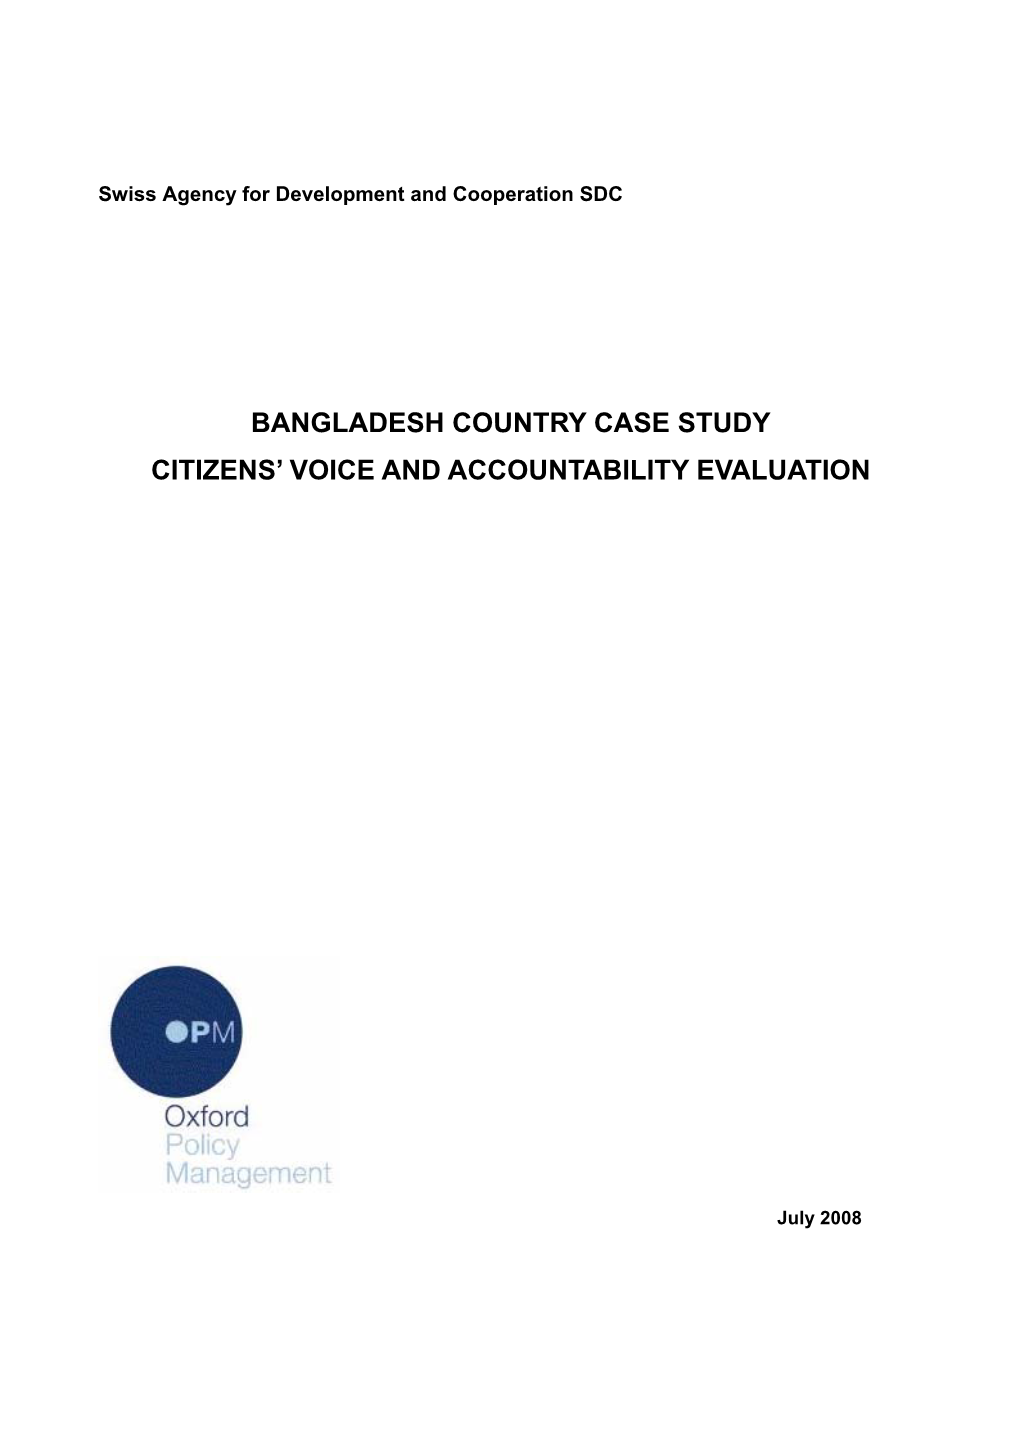 Bangladesh Country Case Study Citizens’ Voice and Accountability Evaluation